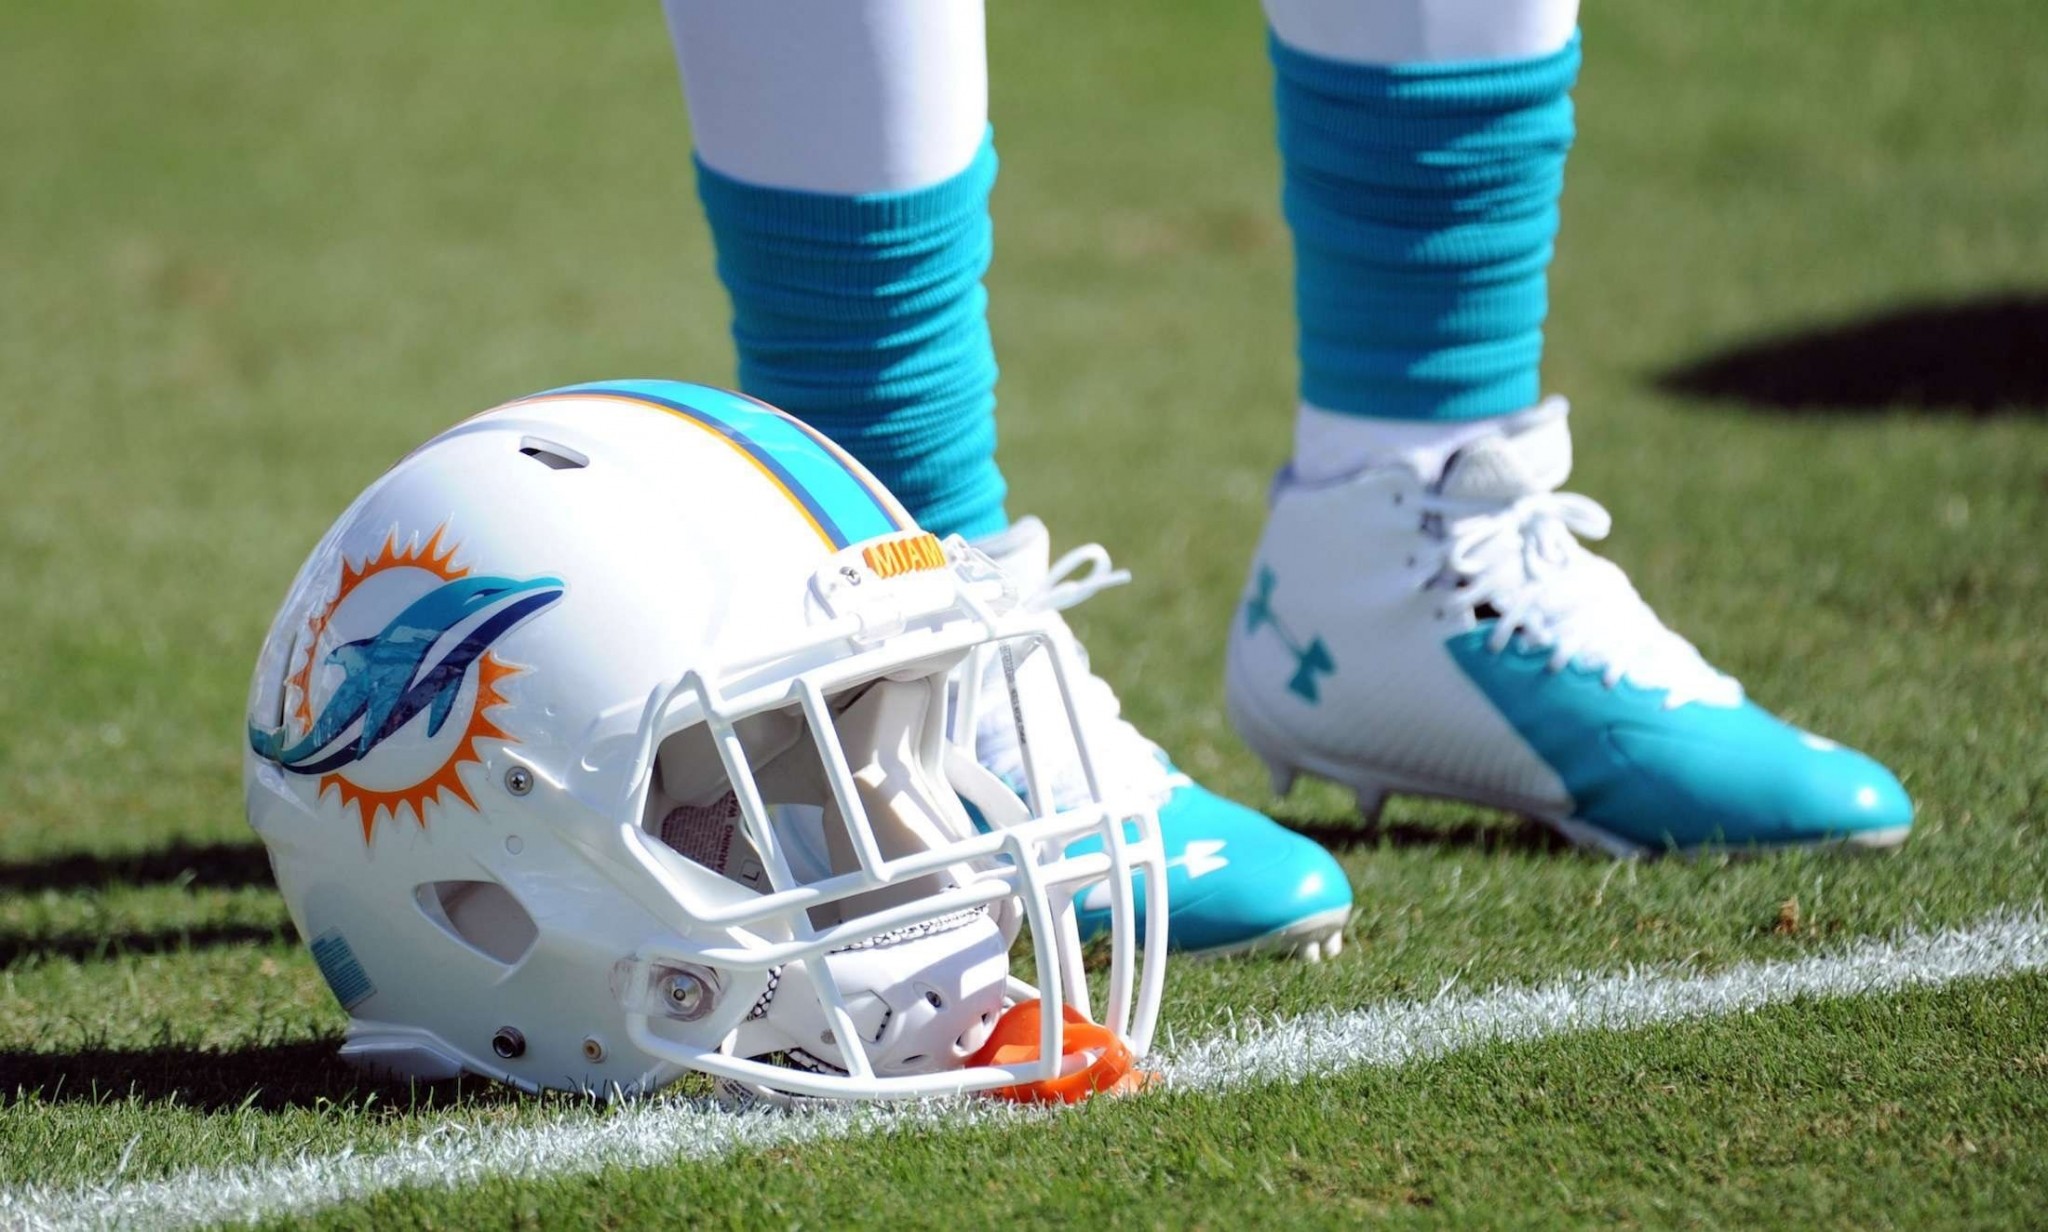 Miami dolphins hd widescreen wallpapers backgrounds